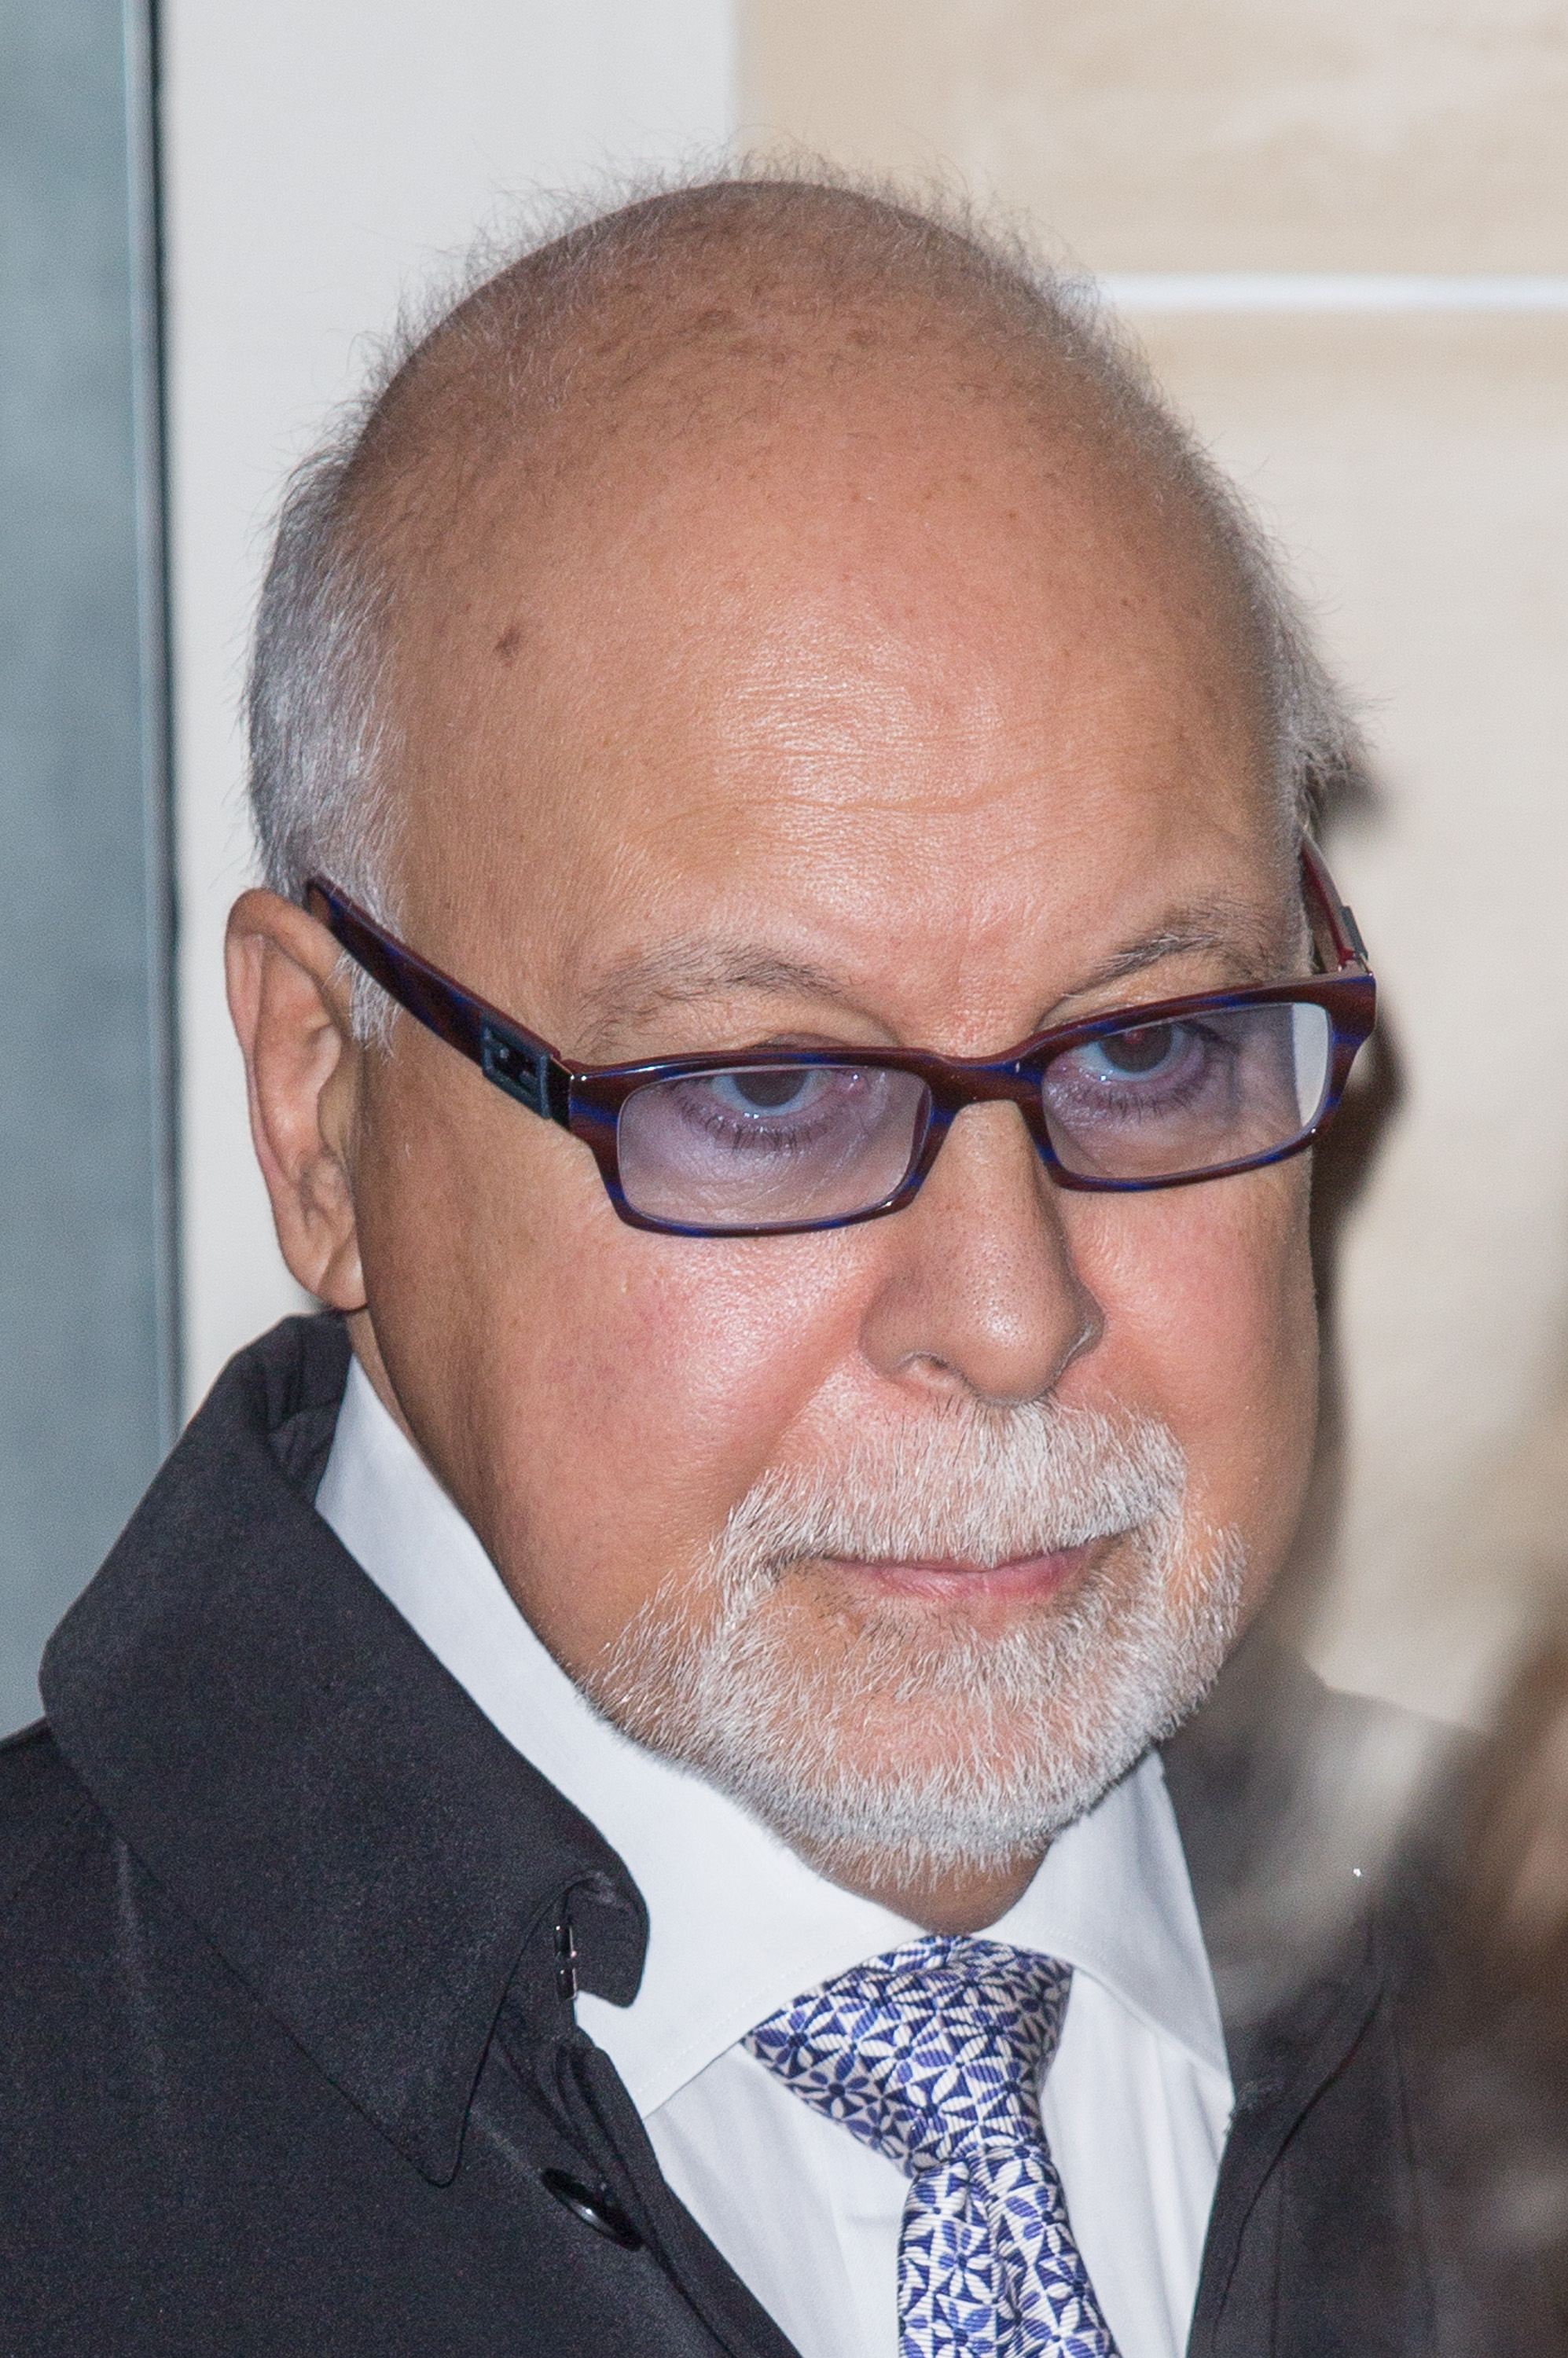 Rene Angelil photographed leaving a hotel on November 13, 2013 in Paris, France. | Source: Getty Images